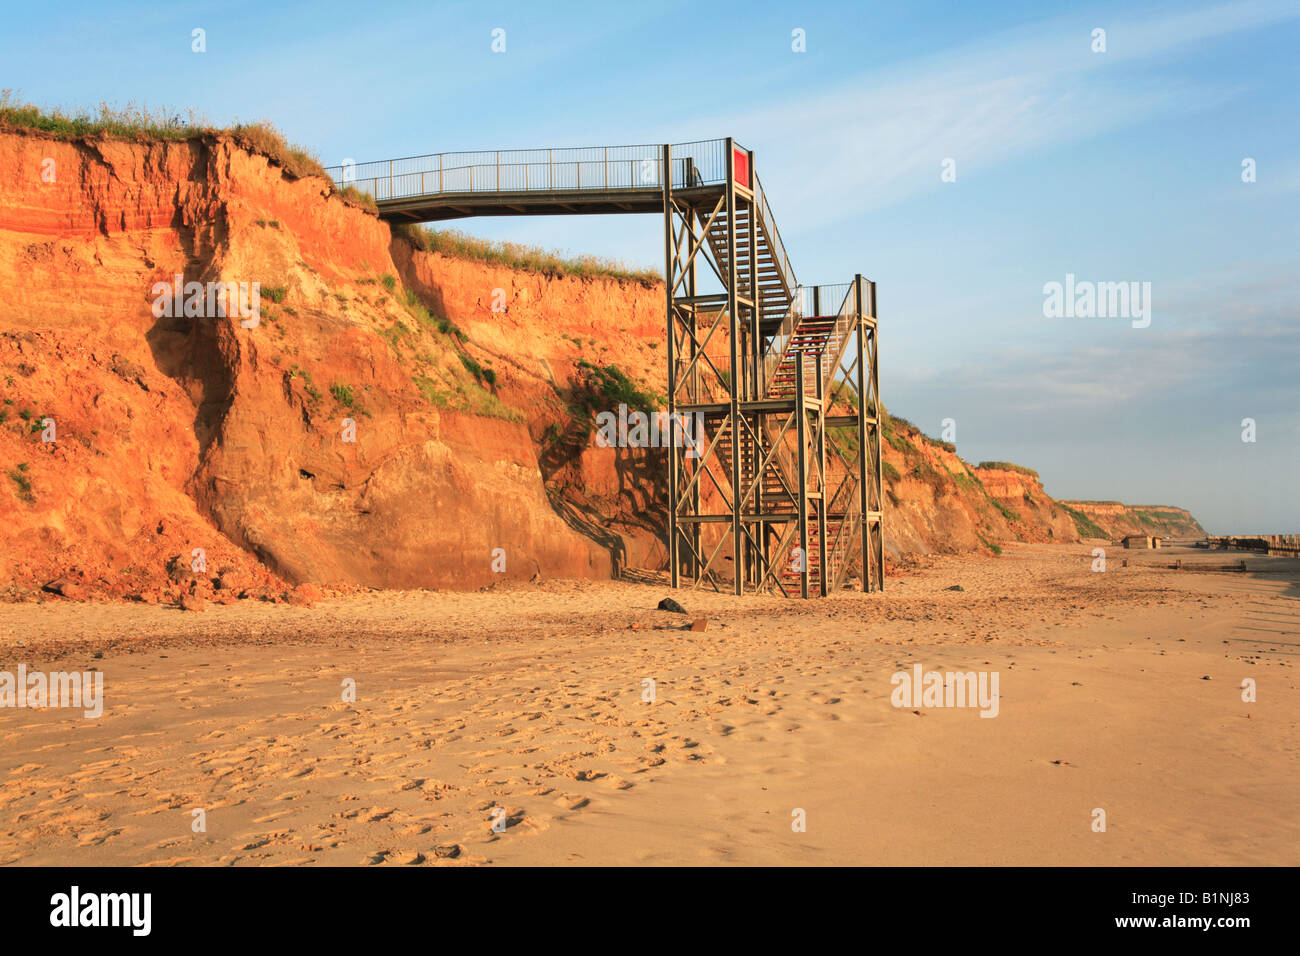 Temporary beach access at Happisburgh, Norfolk, UK, erected after coast erosion destroyed main access ramp. Stock Photo